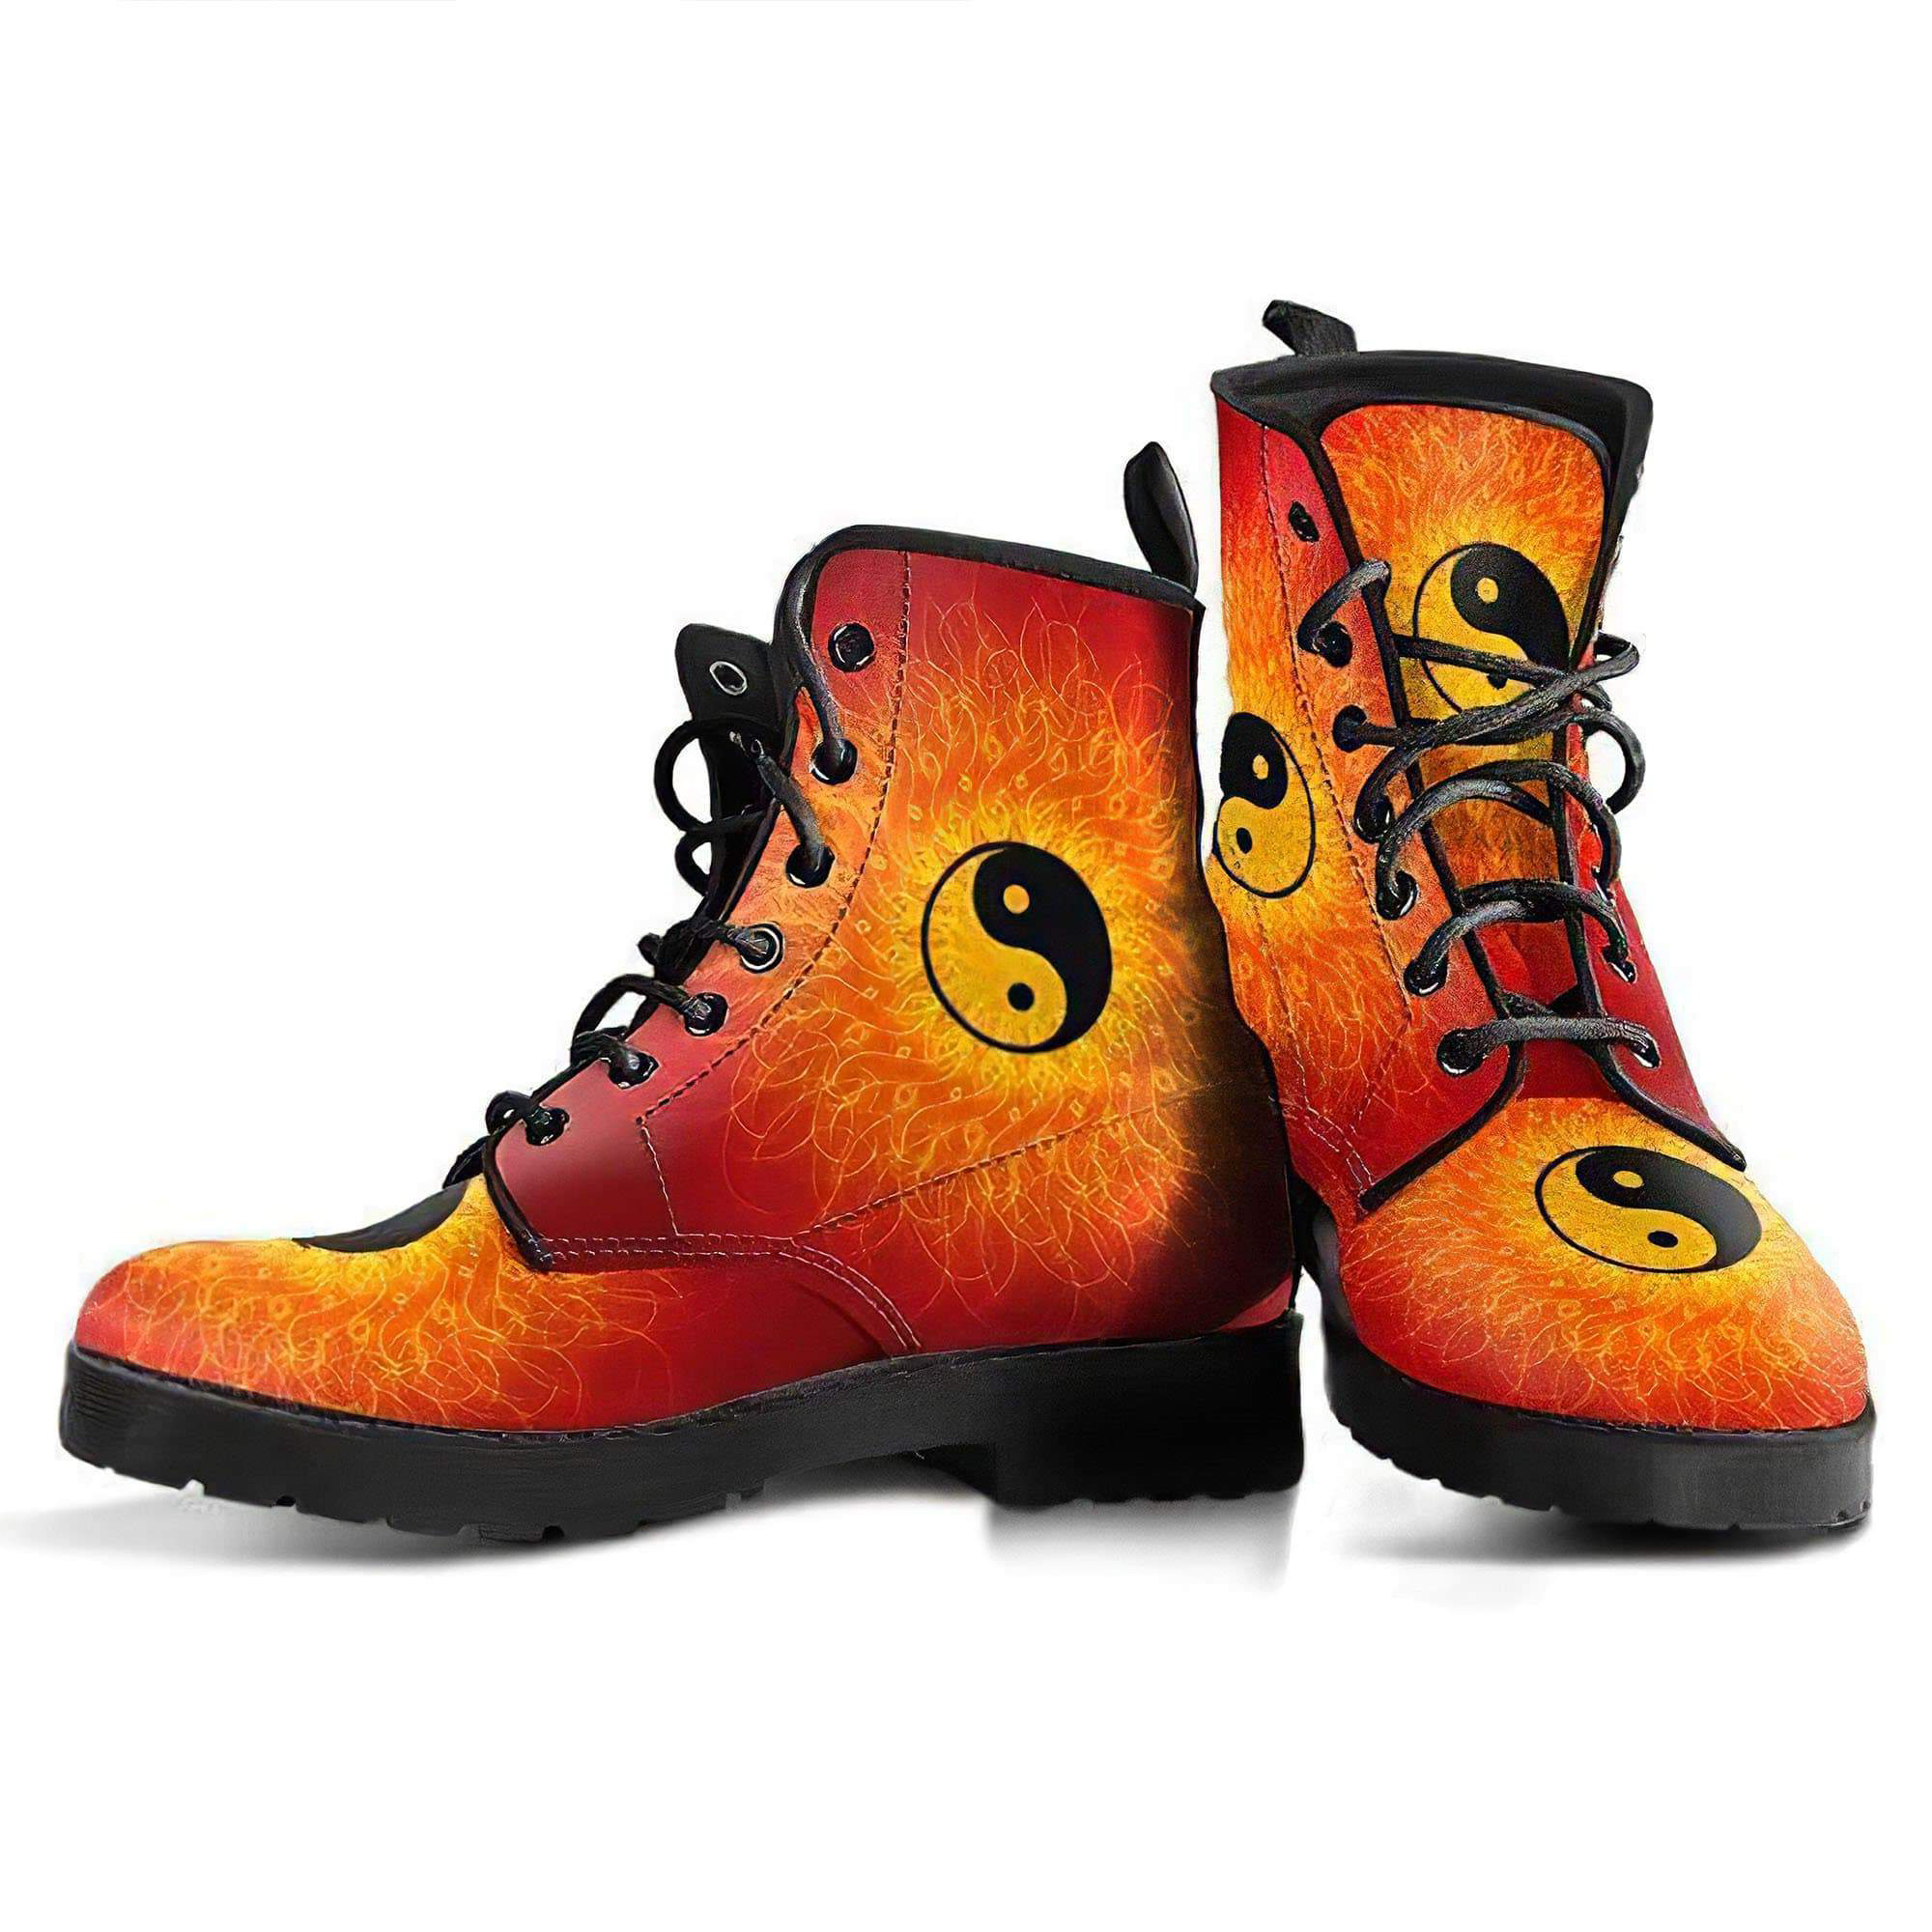 yinyang-mandala-1-handcrafted-boots-women-s-leather-boots-12051981697085.jpg